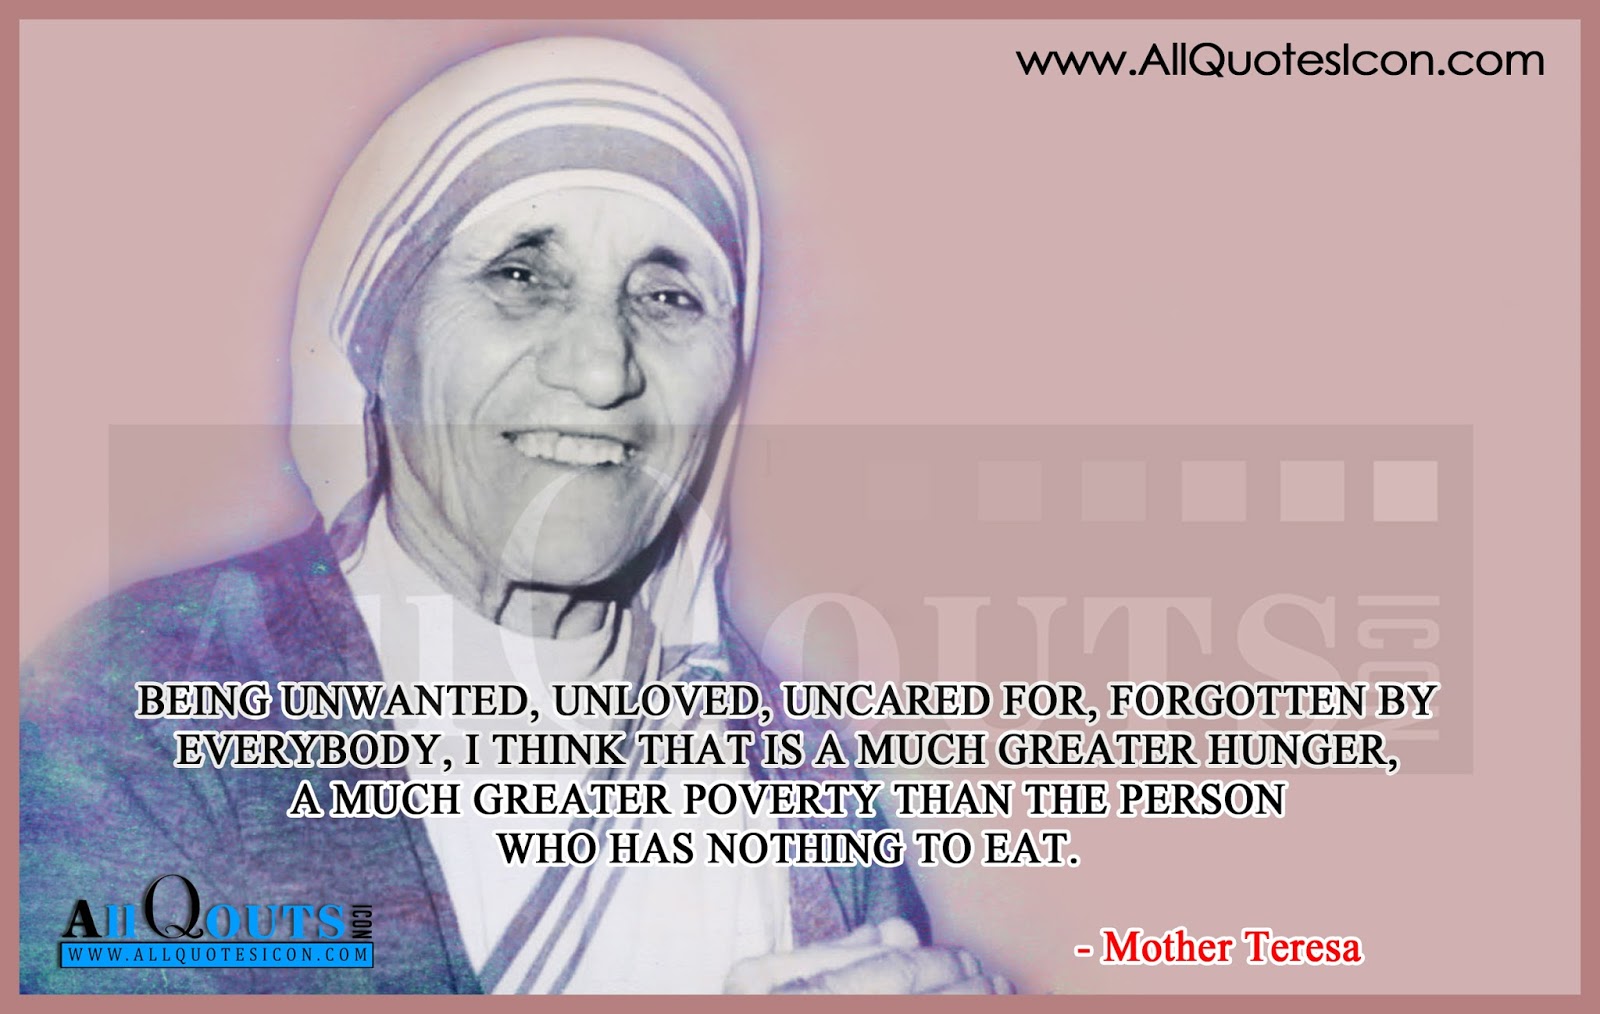 Mother Teresa English Quotes Images Wallpapers Pictures - Mother Teresa - HD Wallpaper 